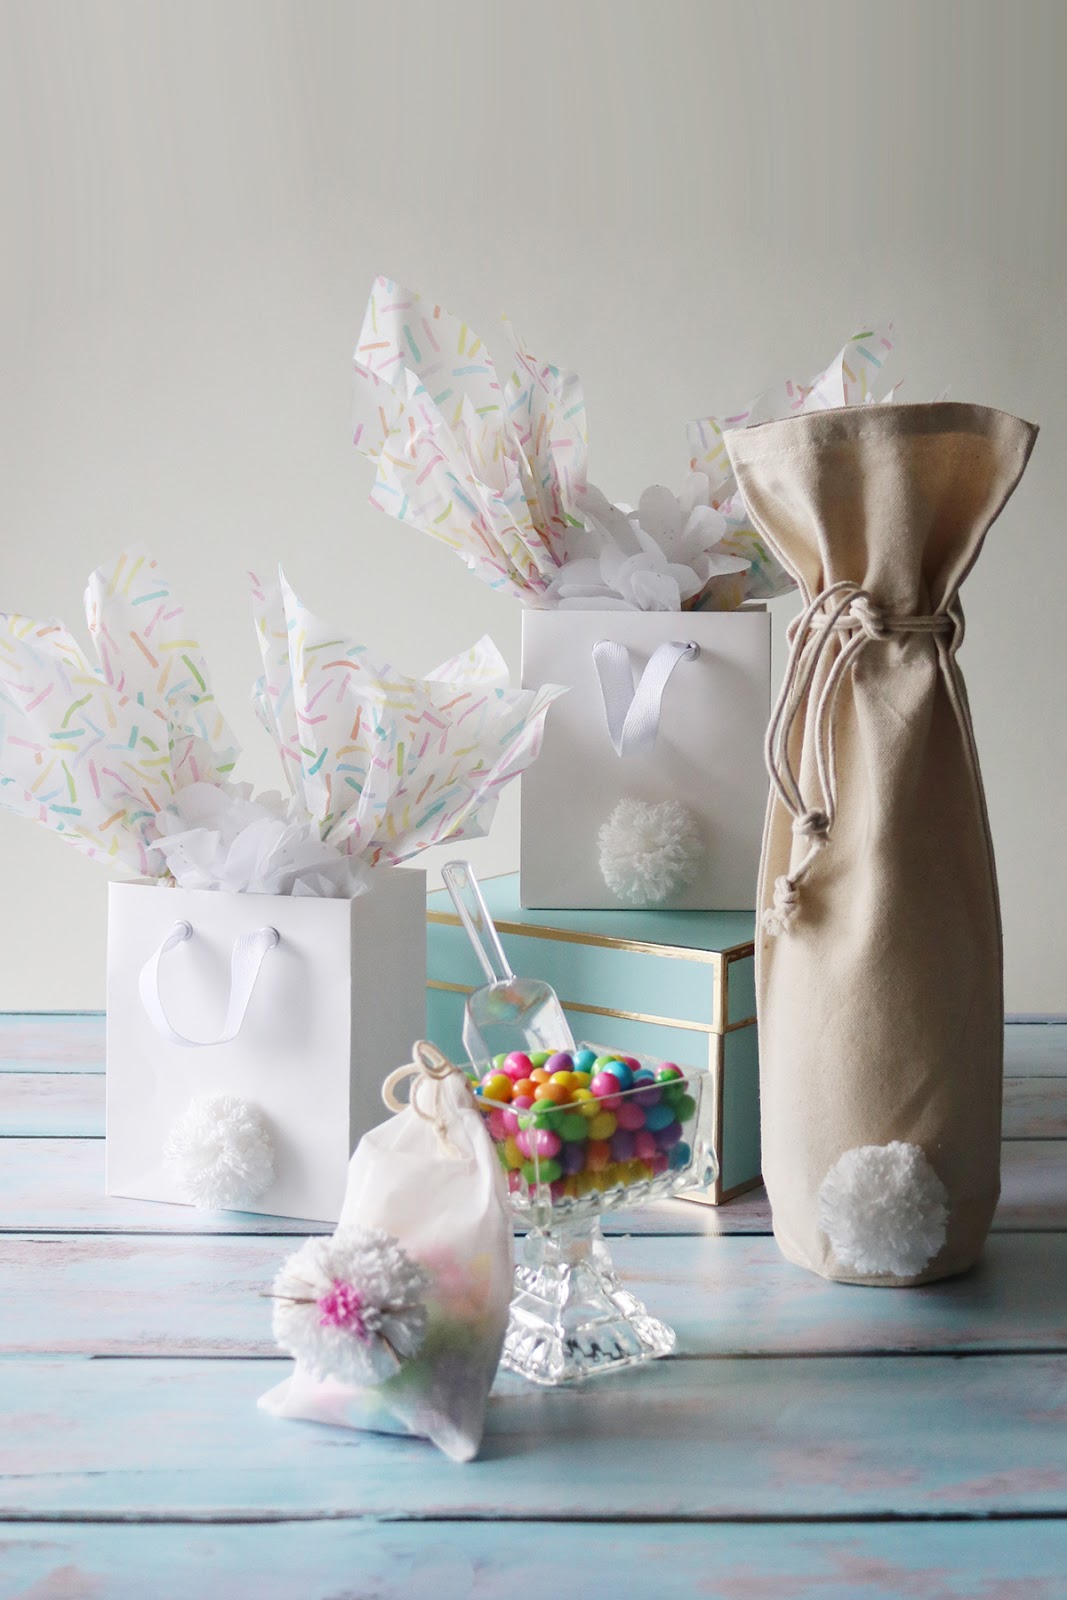 Easter gift bag inspiration - pom poms, tissue paper bunny ears and paper bags | Creative Bag